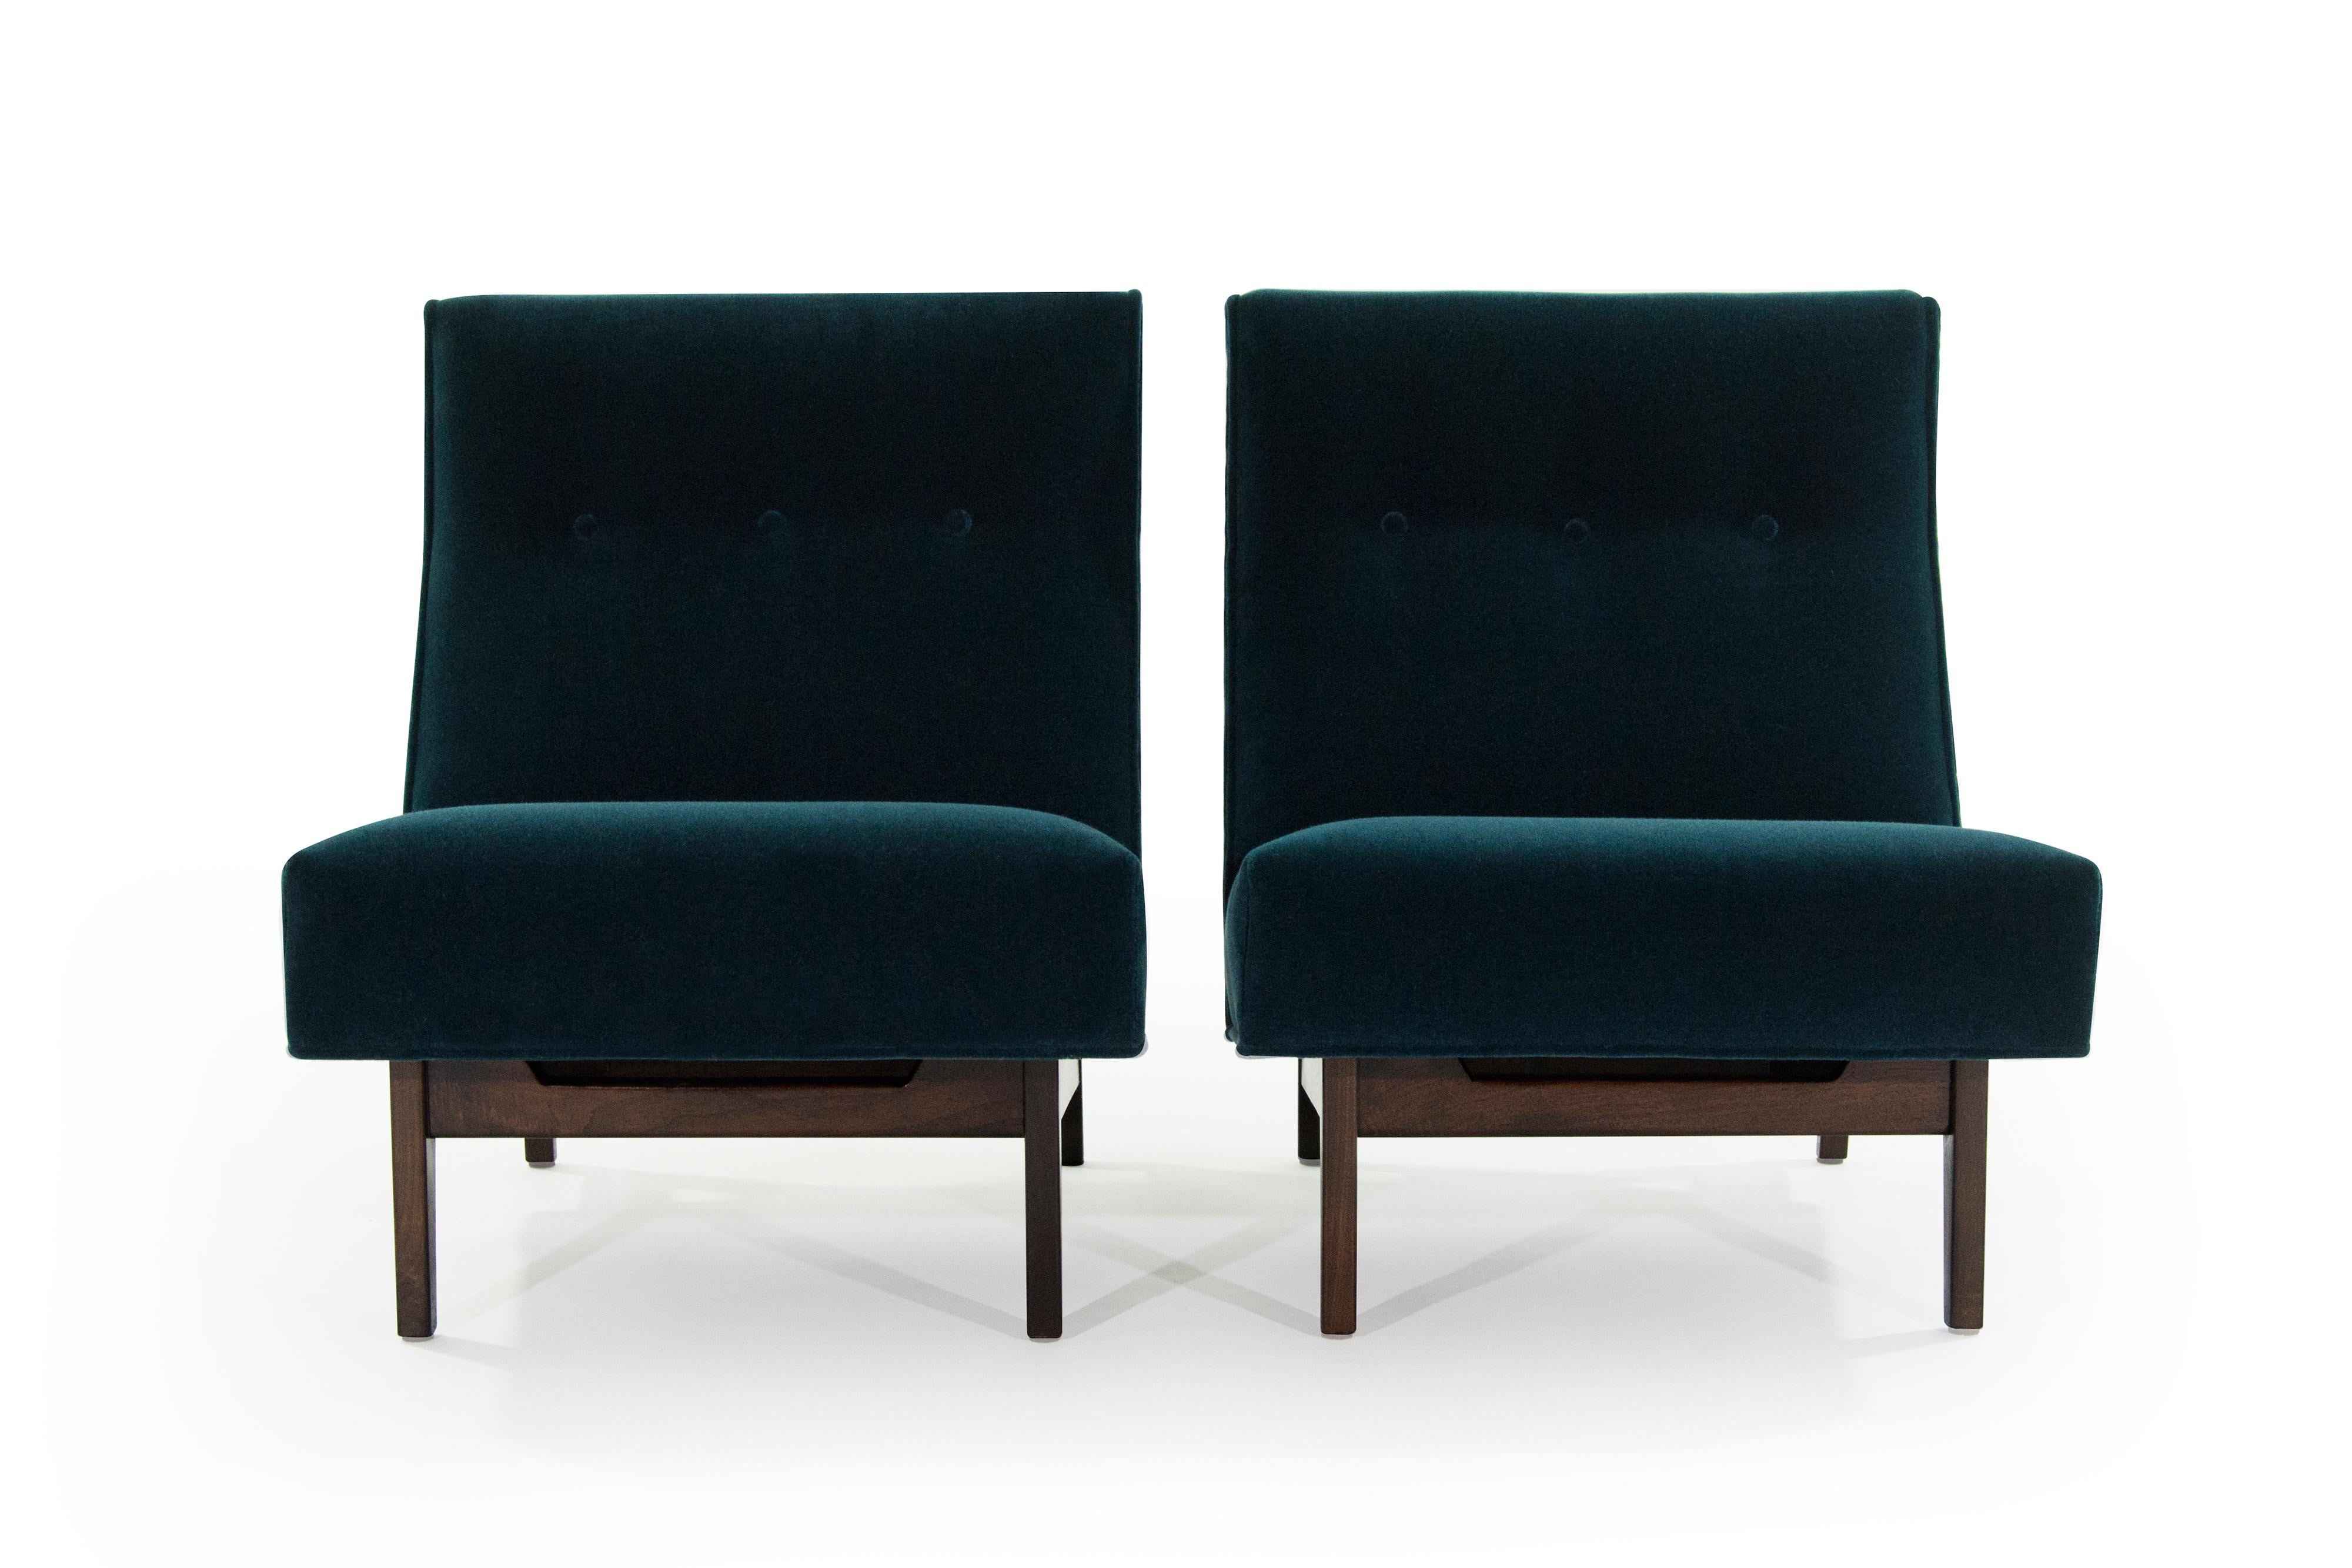 20th Century Classic Slipper Chairs by Jens Risom in Teal Mohair, circa 1950s